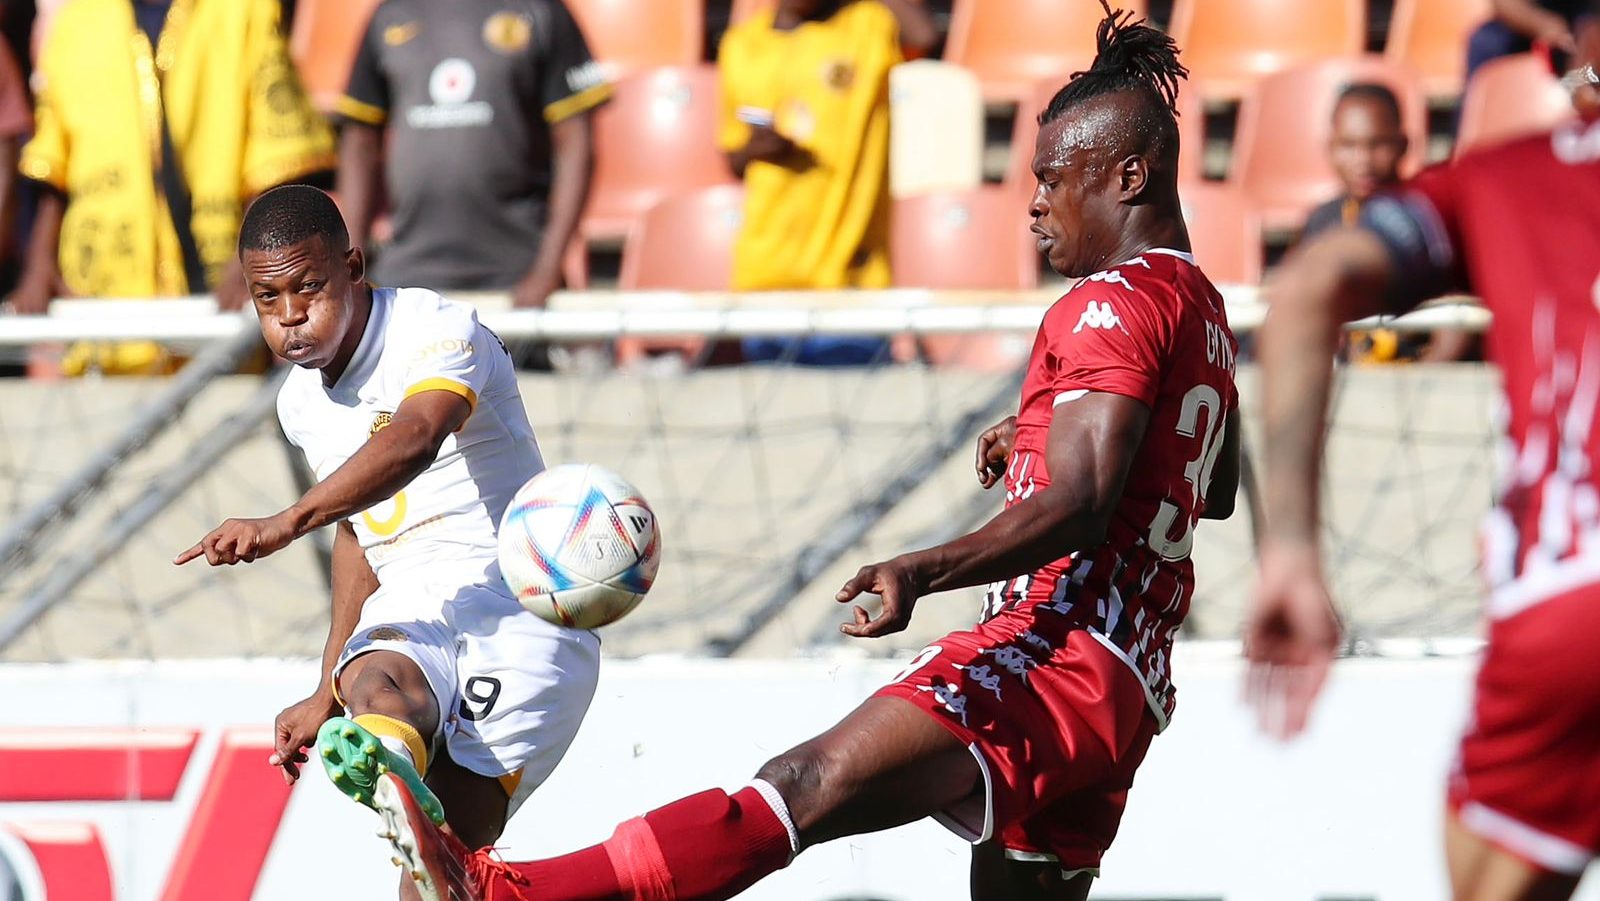 Limpopo side Sekhukhune United stun Kaizer Chiefs in Polokwane